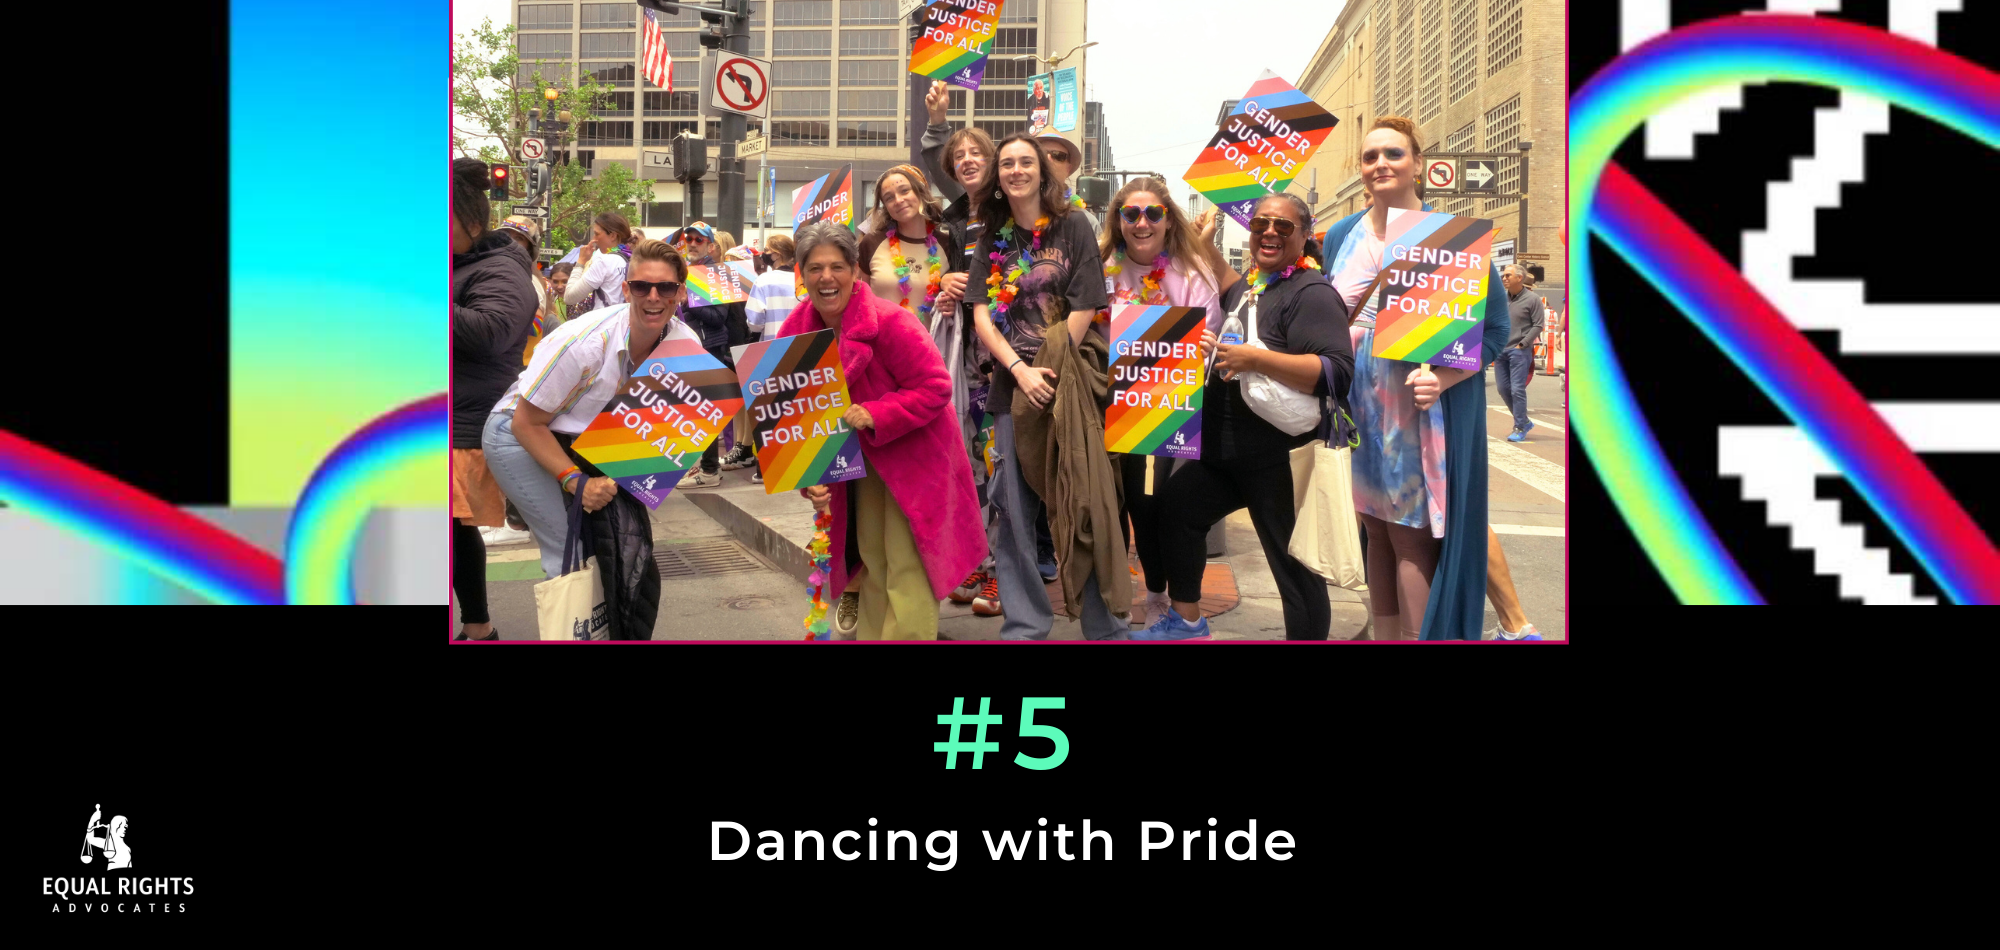 A black image with white pixel designs and colorful swirls. At the top, a photo of ERA's contingent at San Francisco Pride, smiling and holding rainbow signs that say Gender Justice for All. Underneath, text: #5, Dancing with Pride